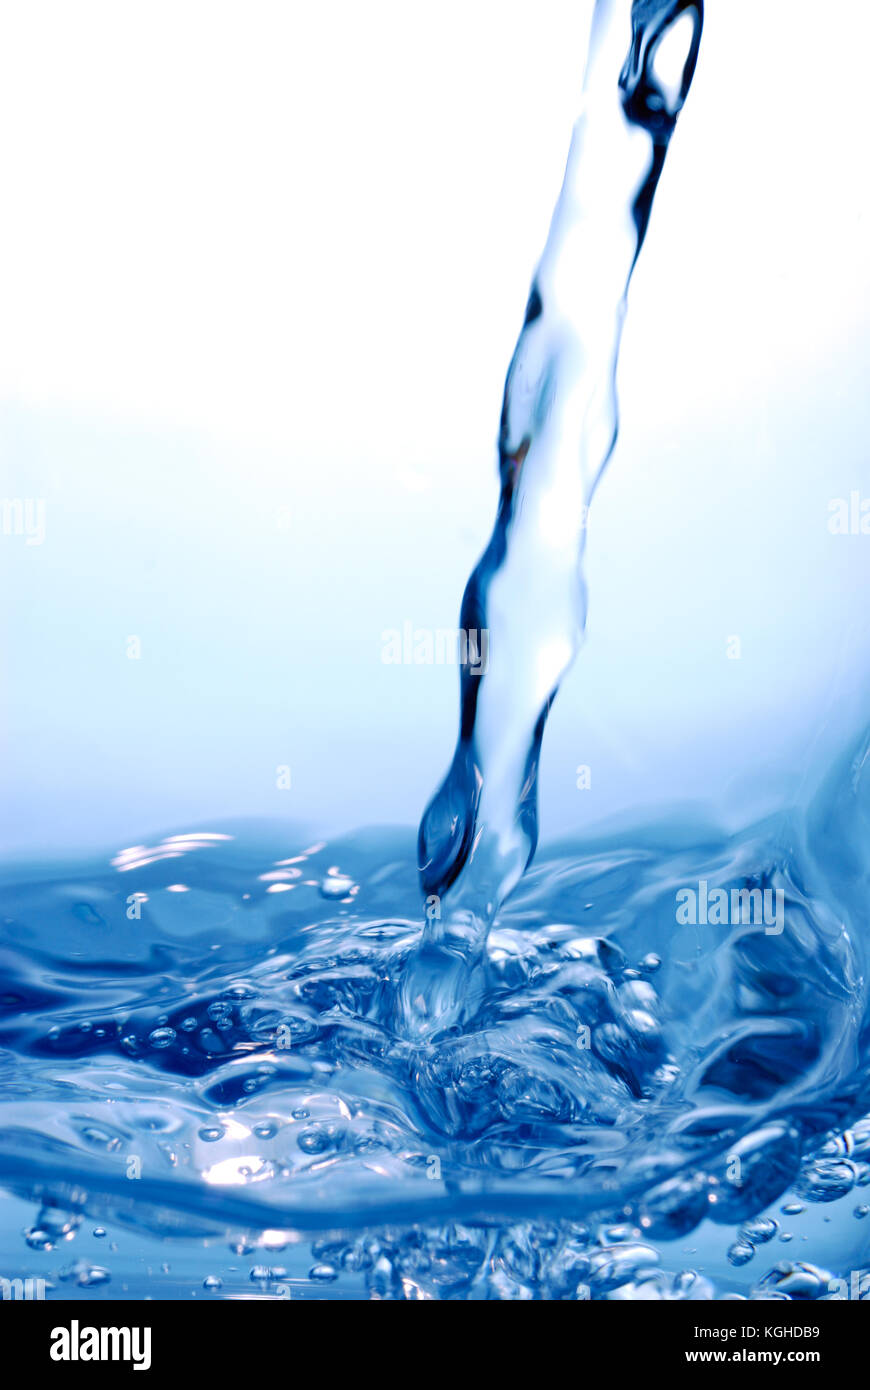 Free flowing water stream and splash. Wavy water surface isolated on blue. Fresh and dynamic abstract background. Stock Photo